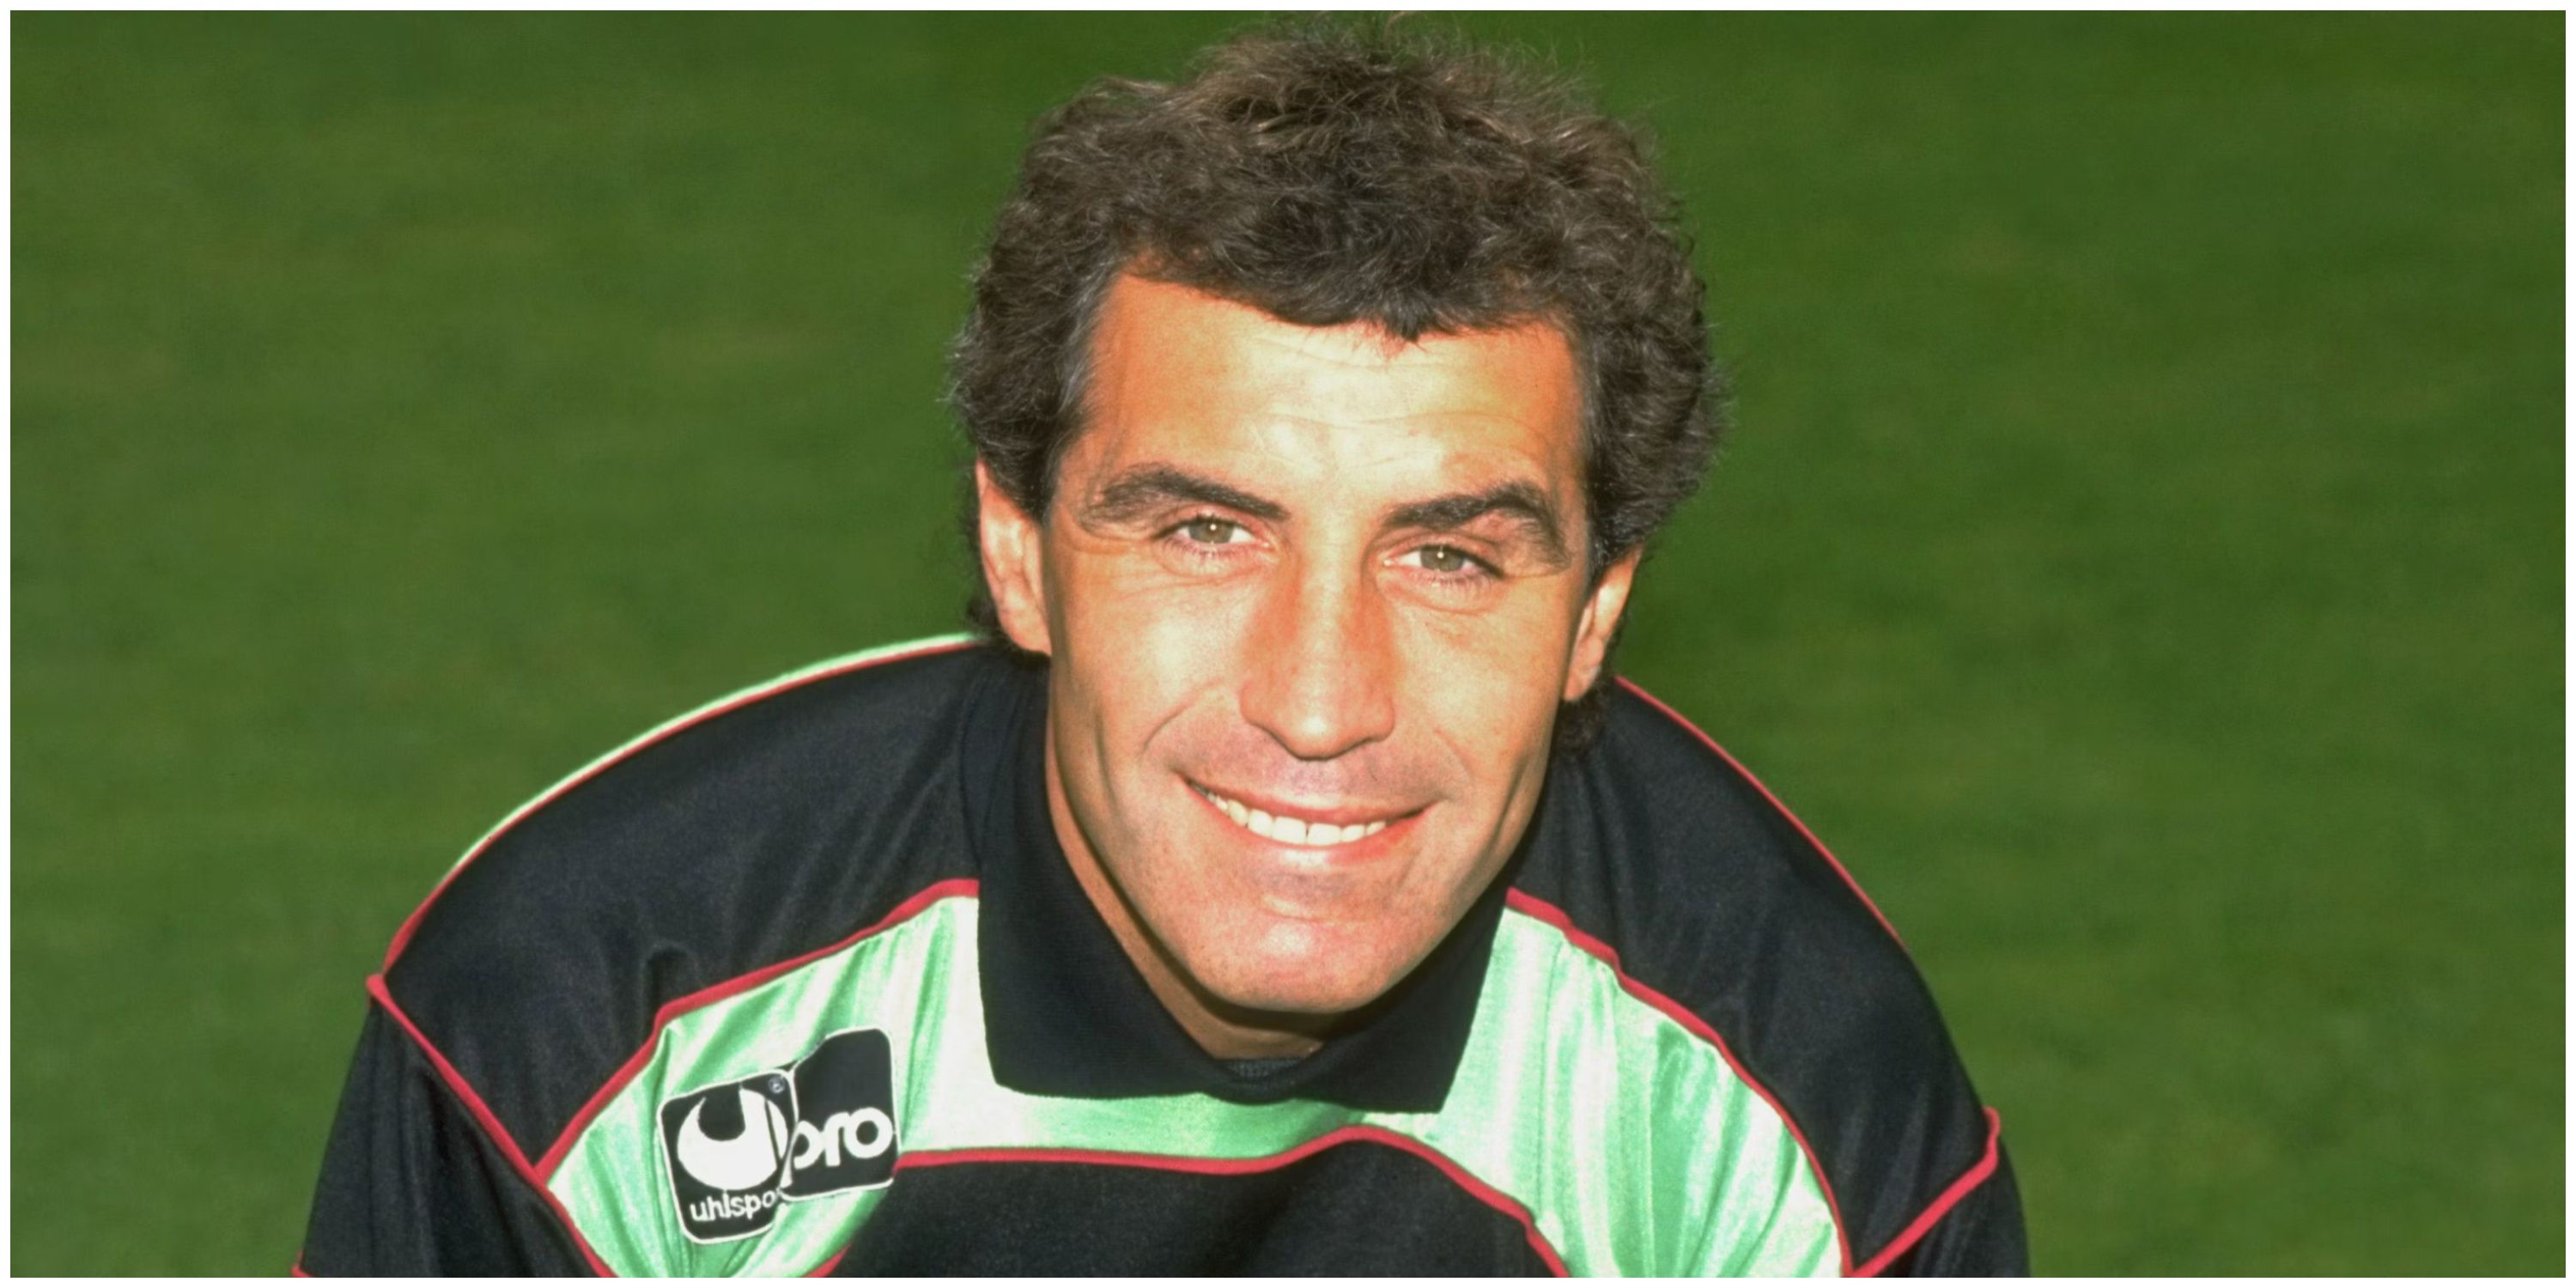 Peter Shilton poses for a picture.